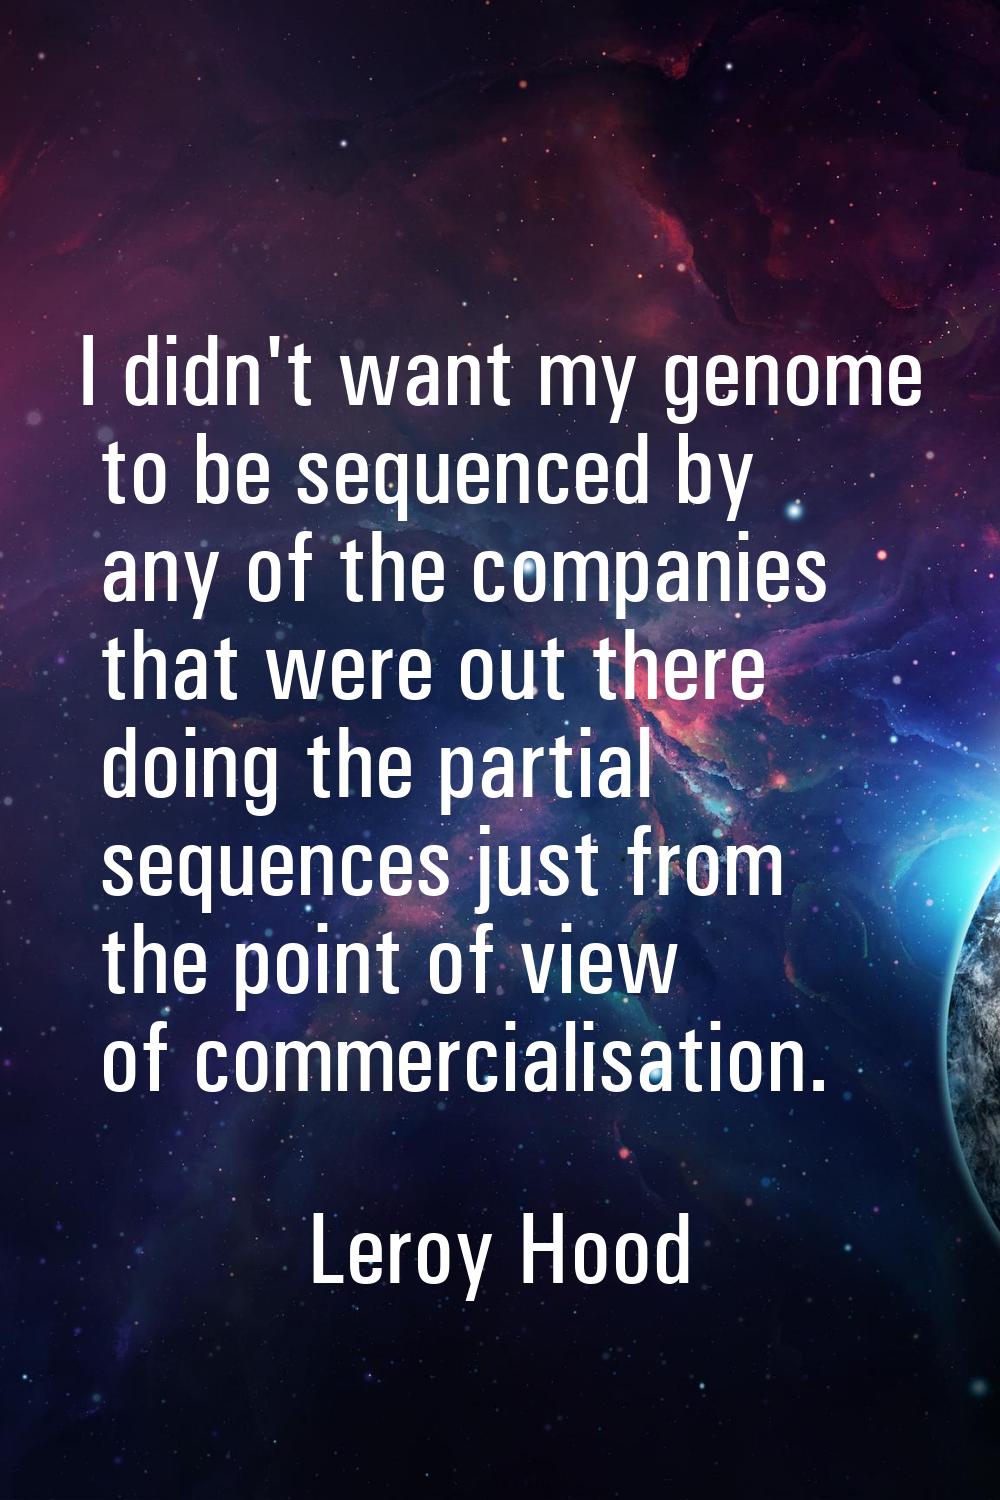 I didn't want my genome to be sequenced by any of the companies that were out there doing the parti